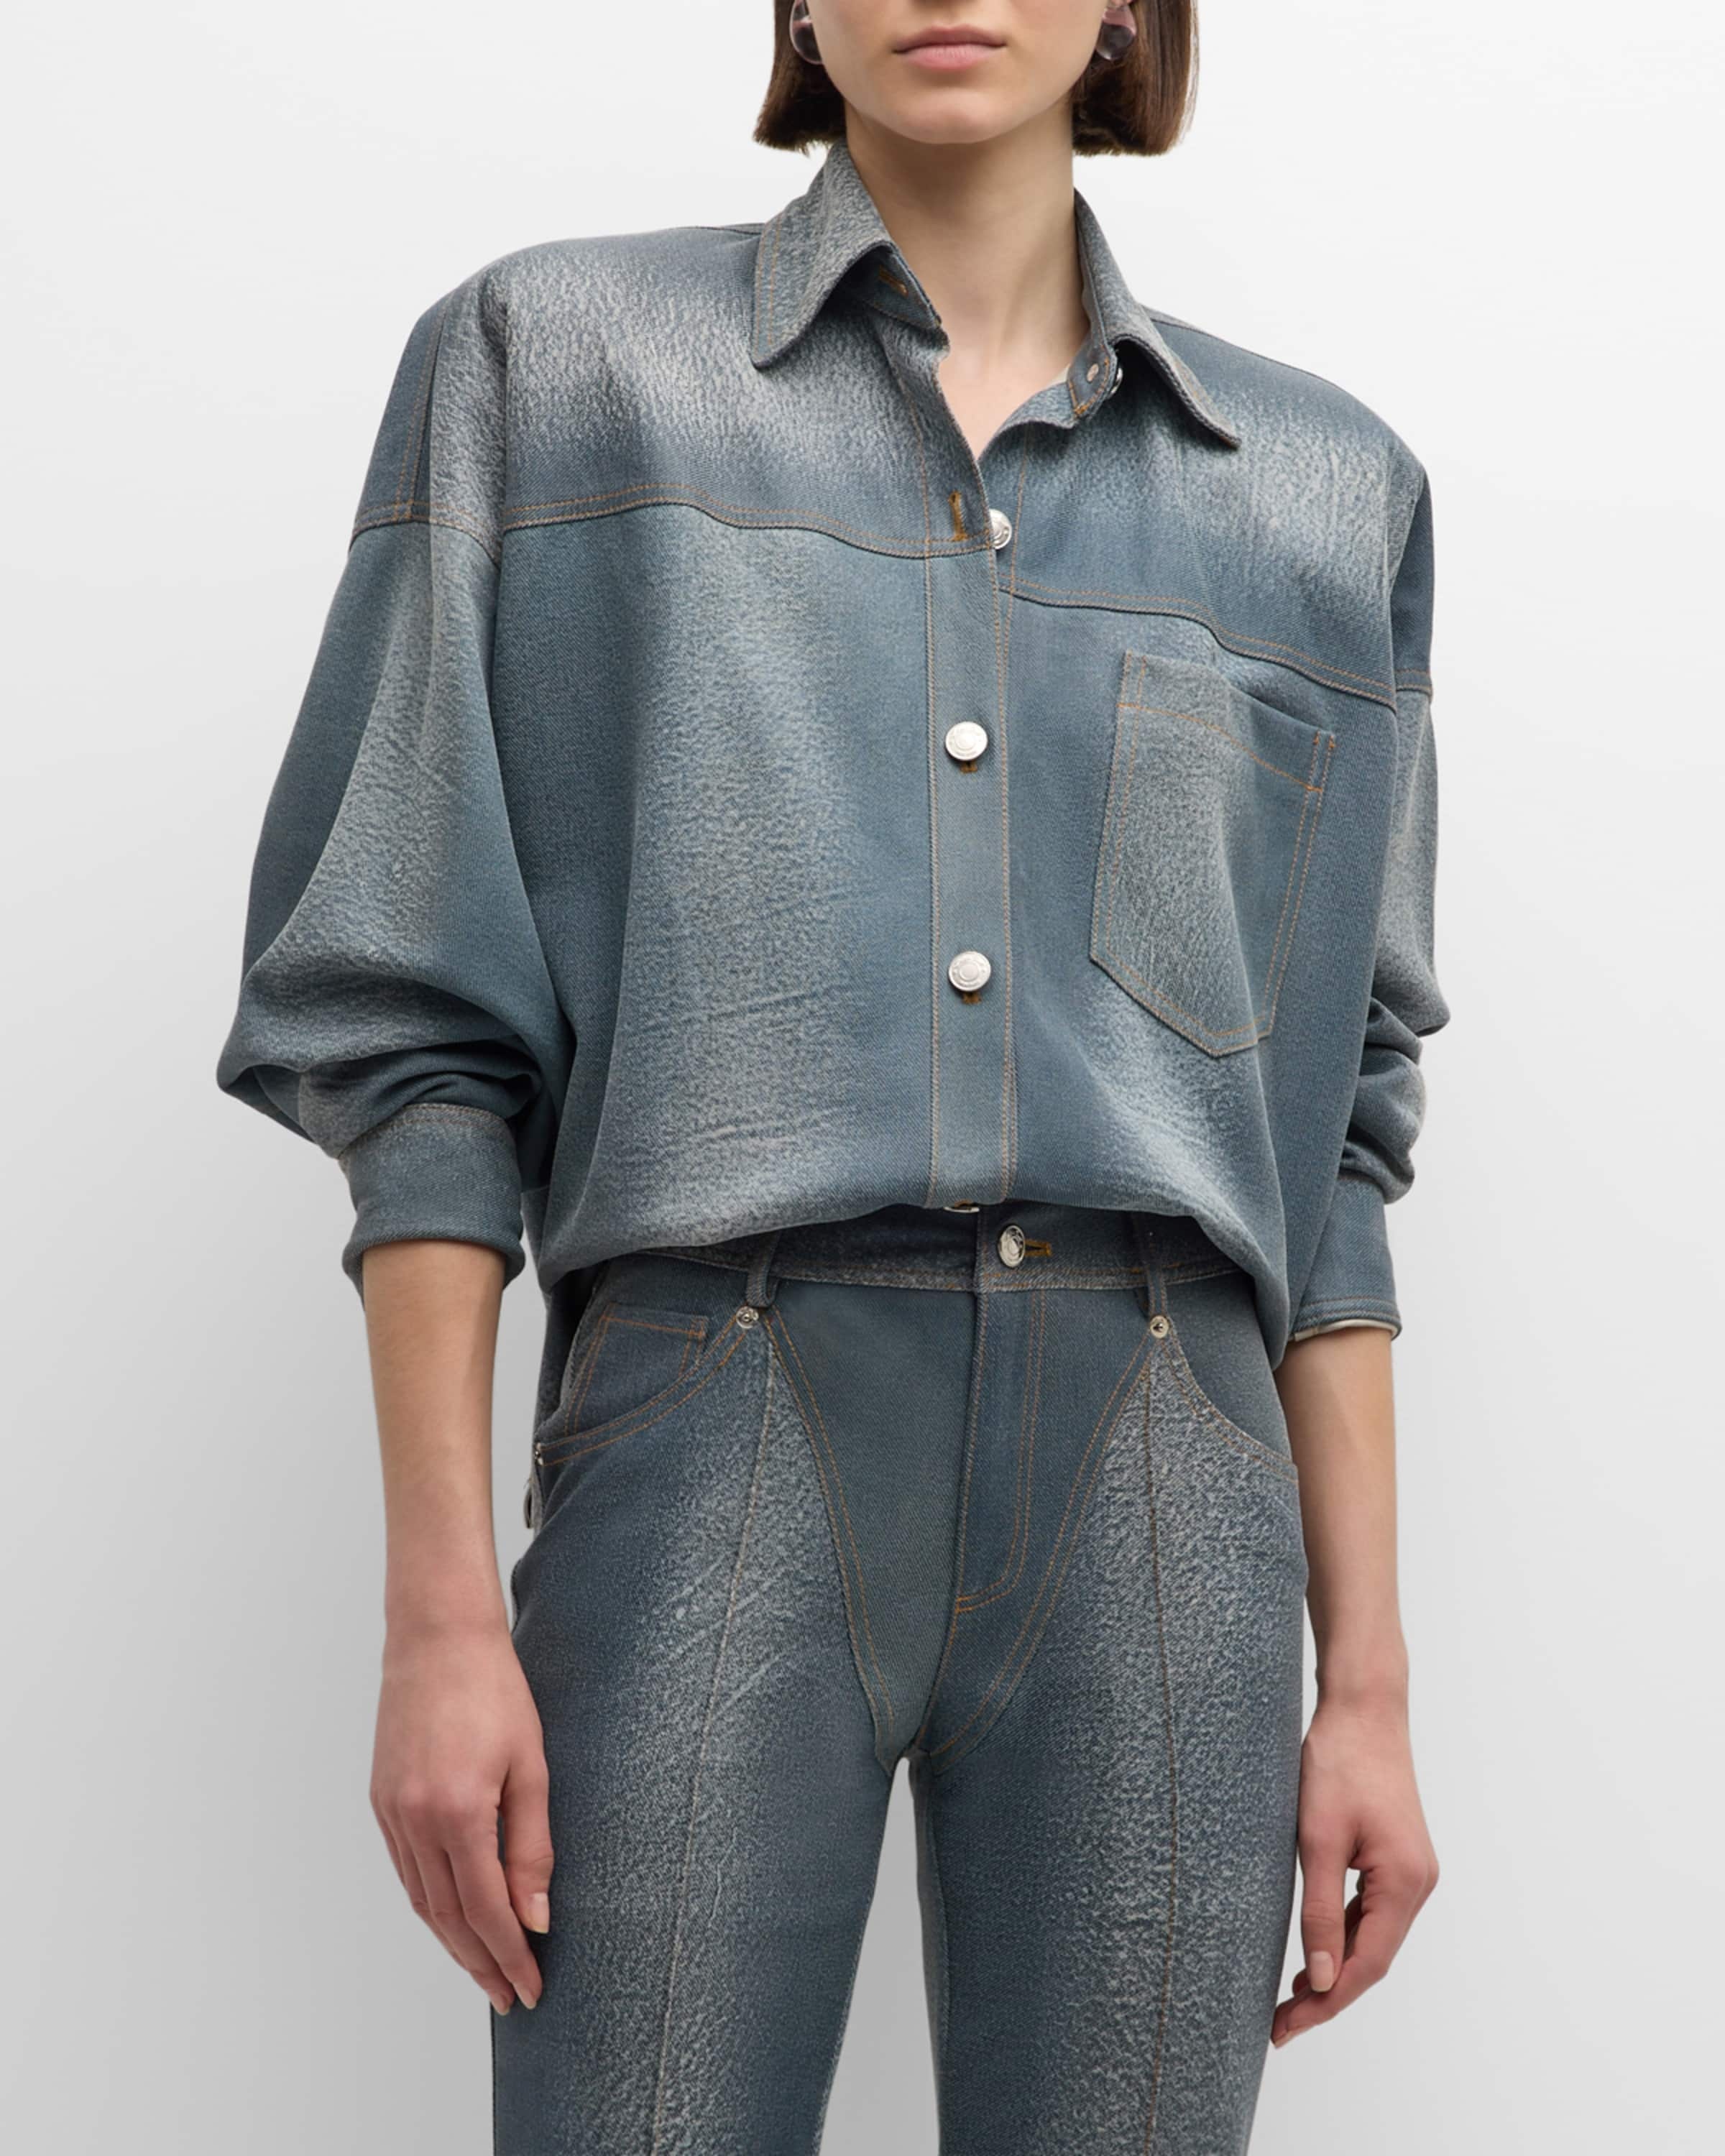 Denim-Printed Leather Oversized Button-Down Shirt - 2